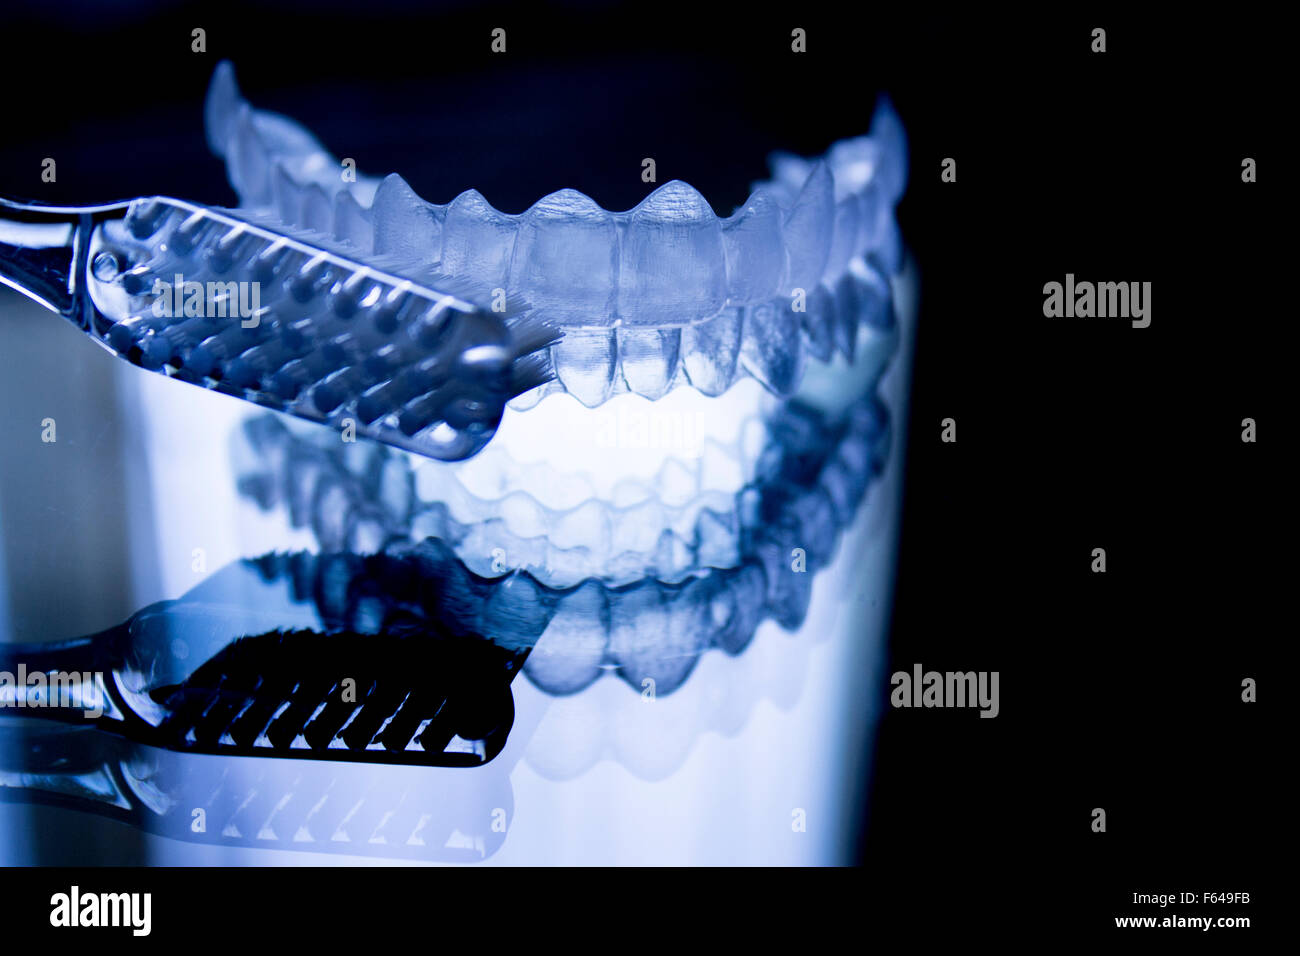 Dental retainers and toothbrush on dark background. Stock Photo